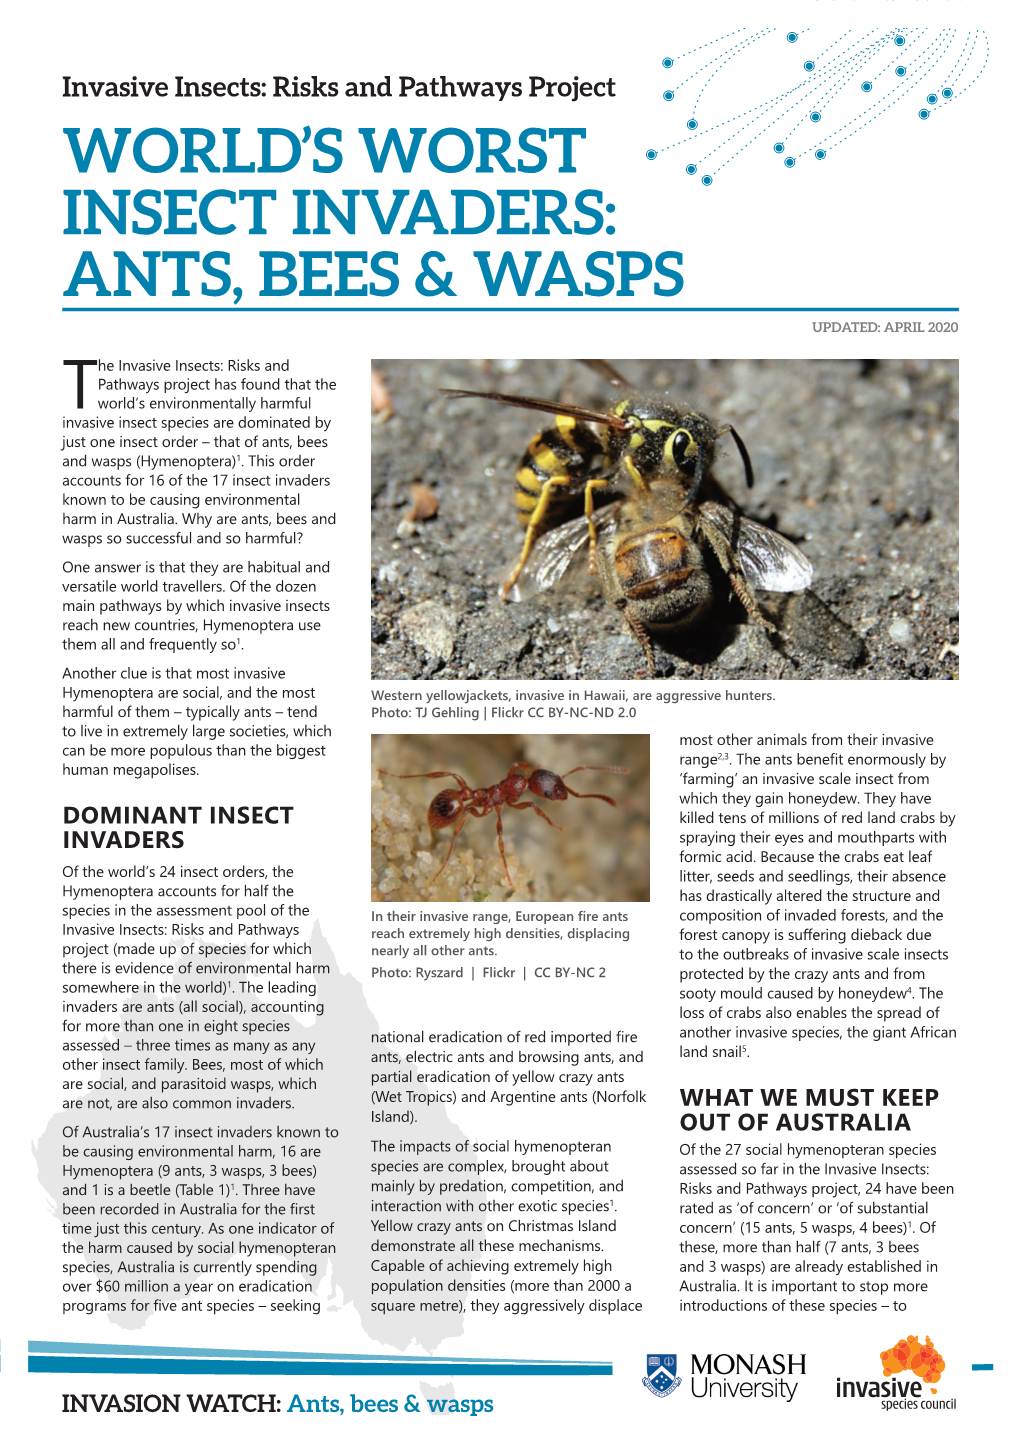 Risks and Pathways Project WORLD’S WORST INSECT INVADERS: ANTS, BEES & WASPS